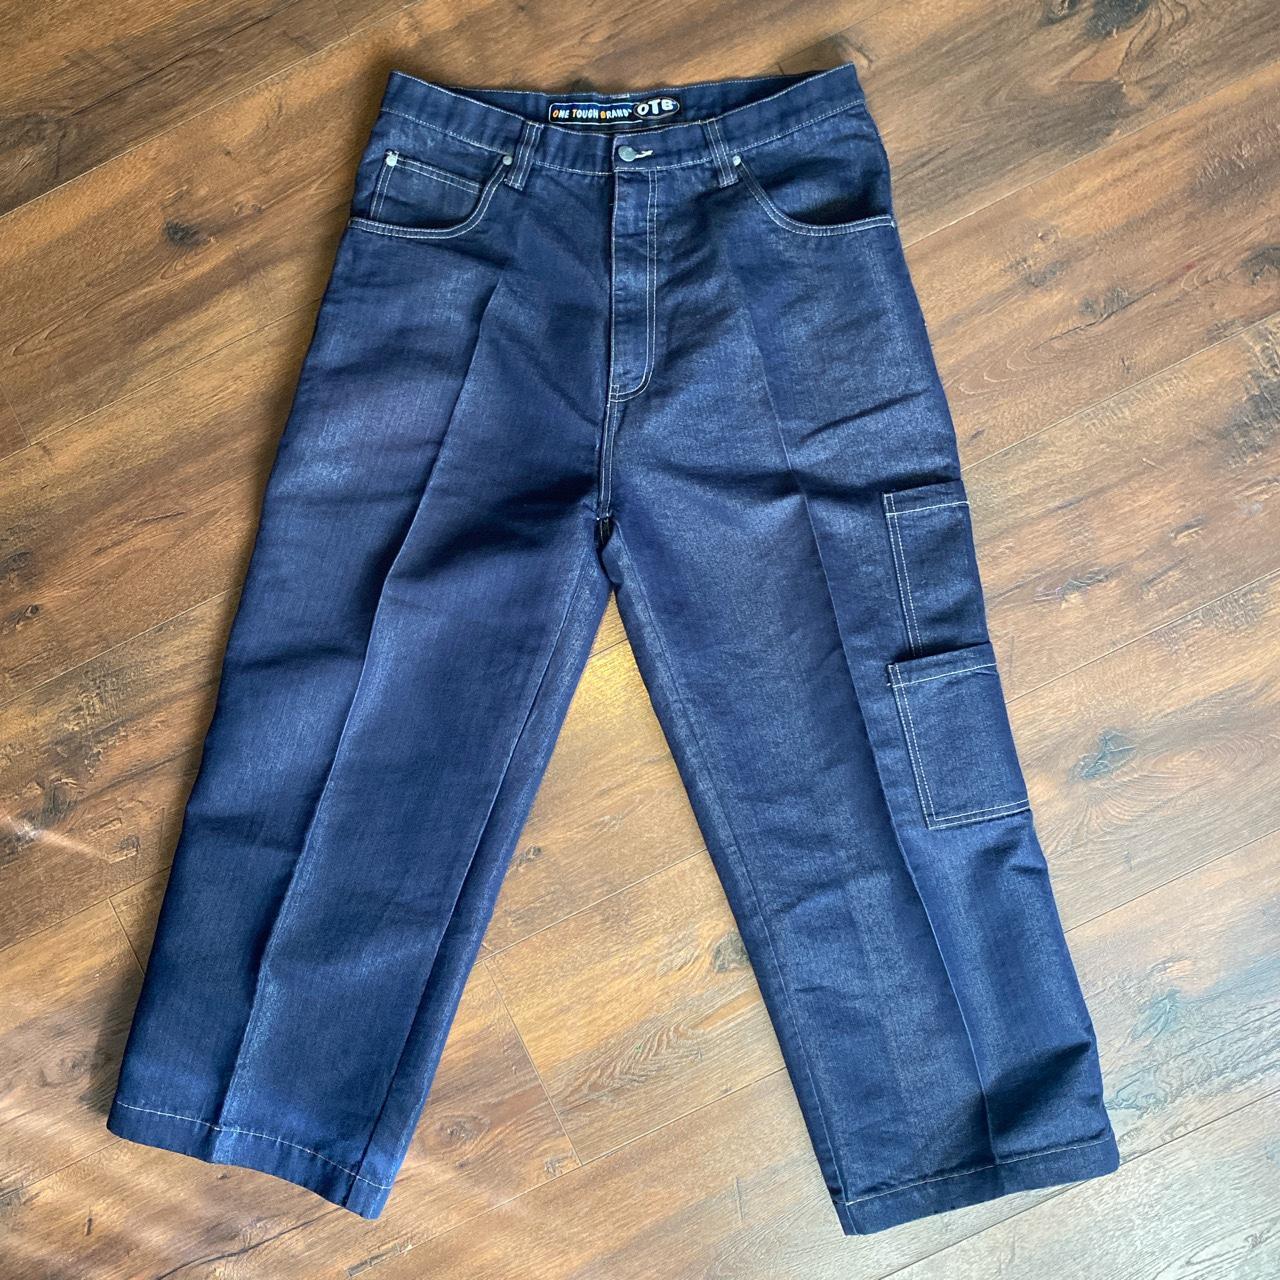 Wide leg jnco style OTB pants 36/30 Has a small... - Depop